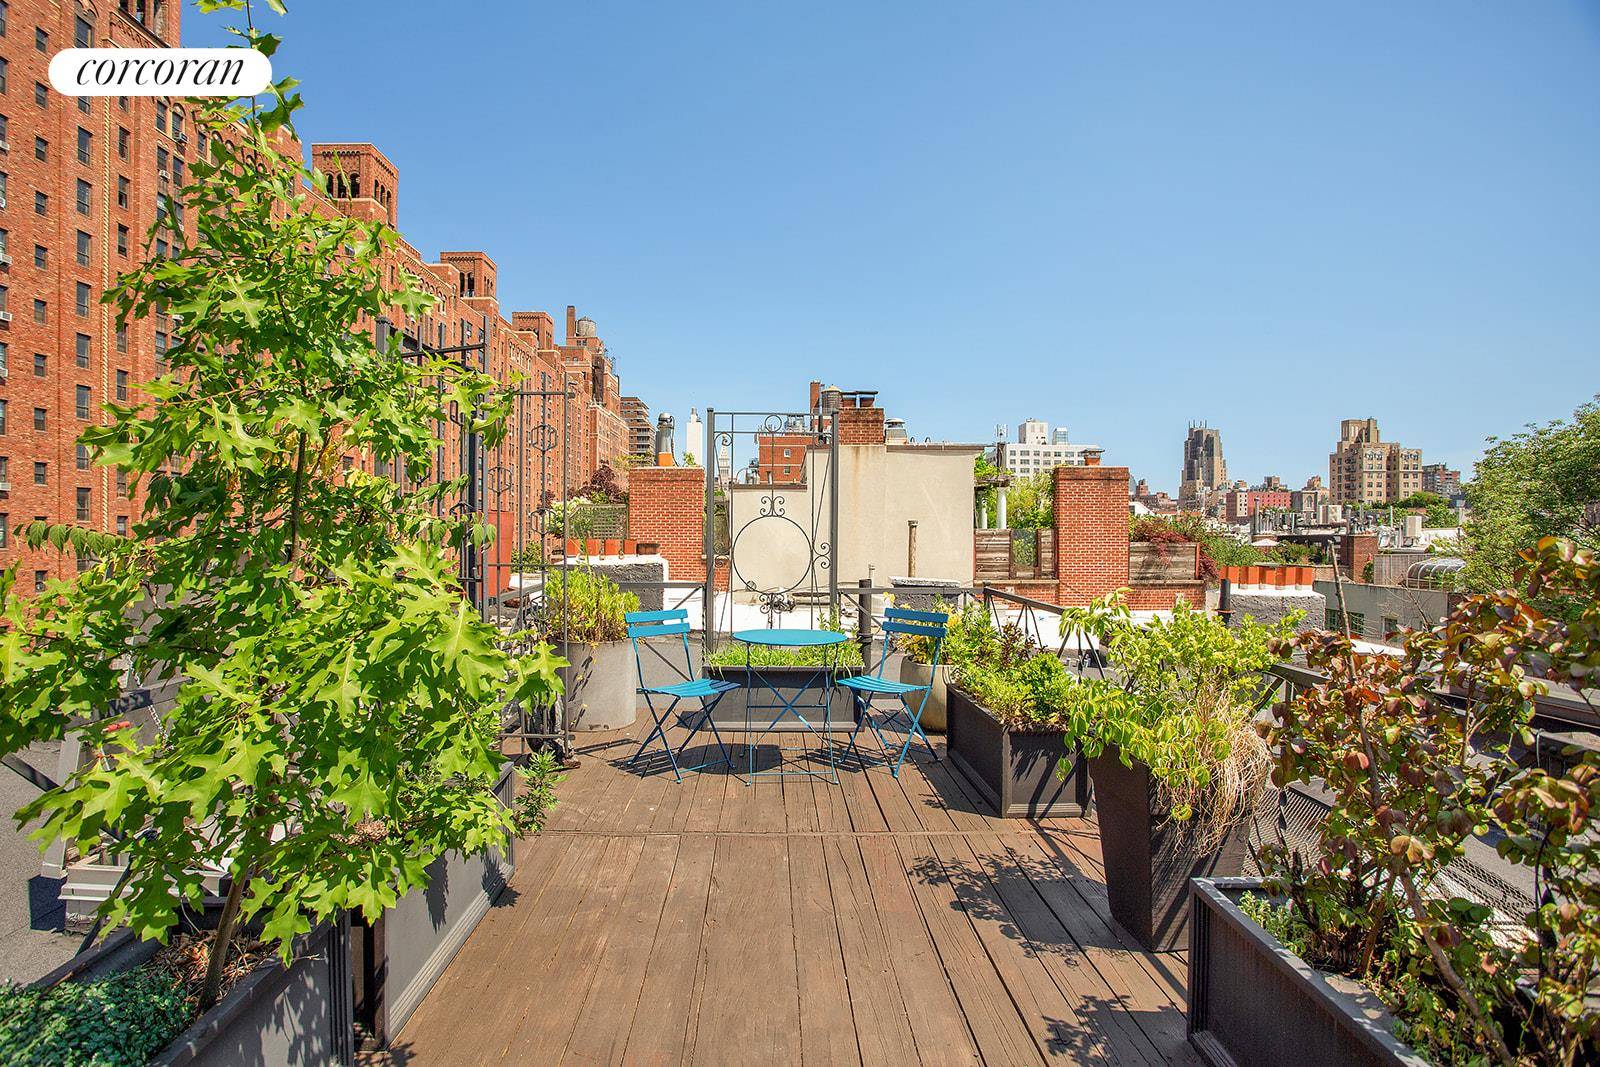 Overlook West Chelsea from your 220 sqft private rooftop located in the iconic Fitzroy Townhomes.